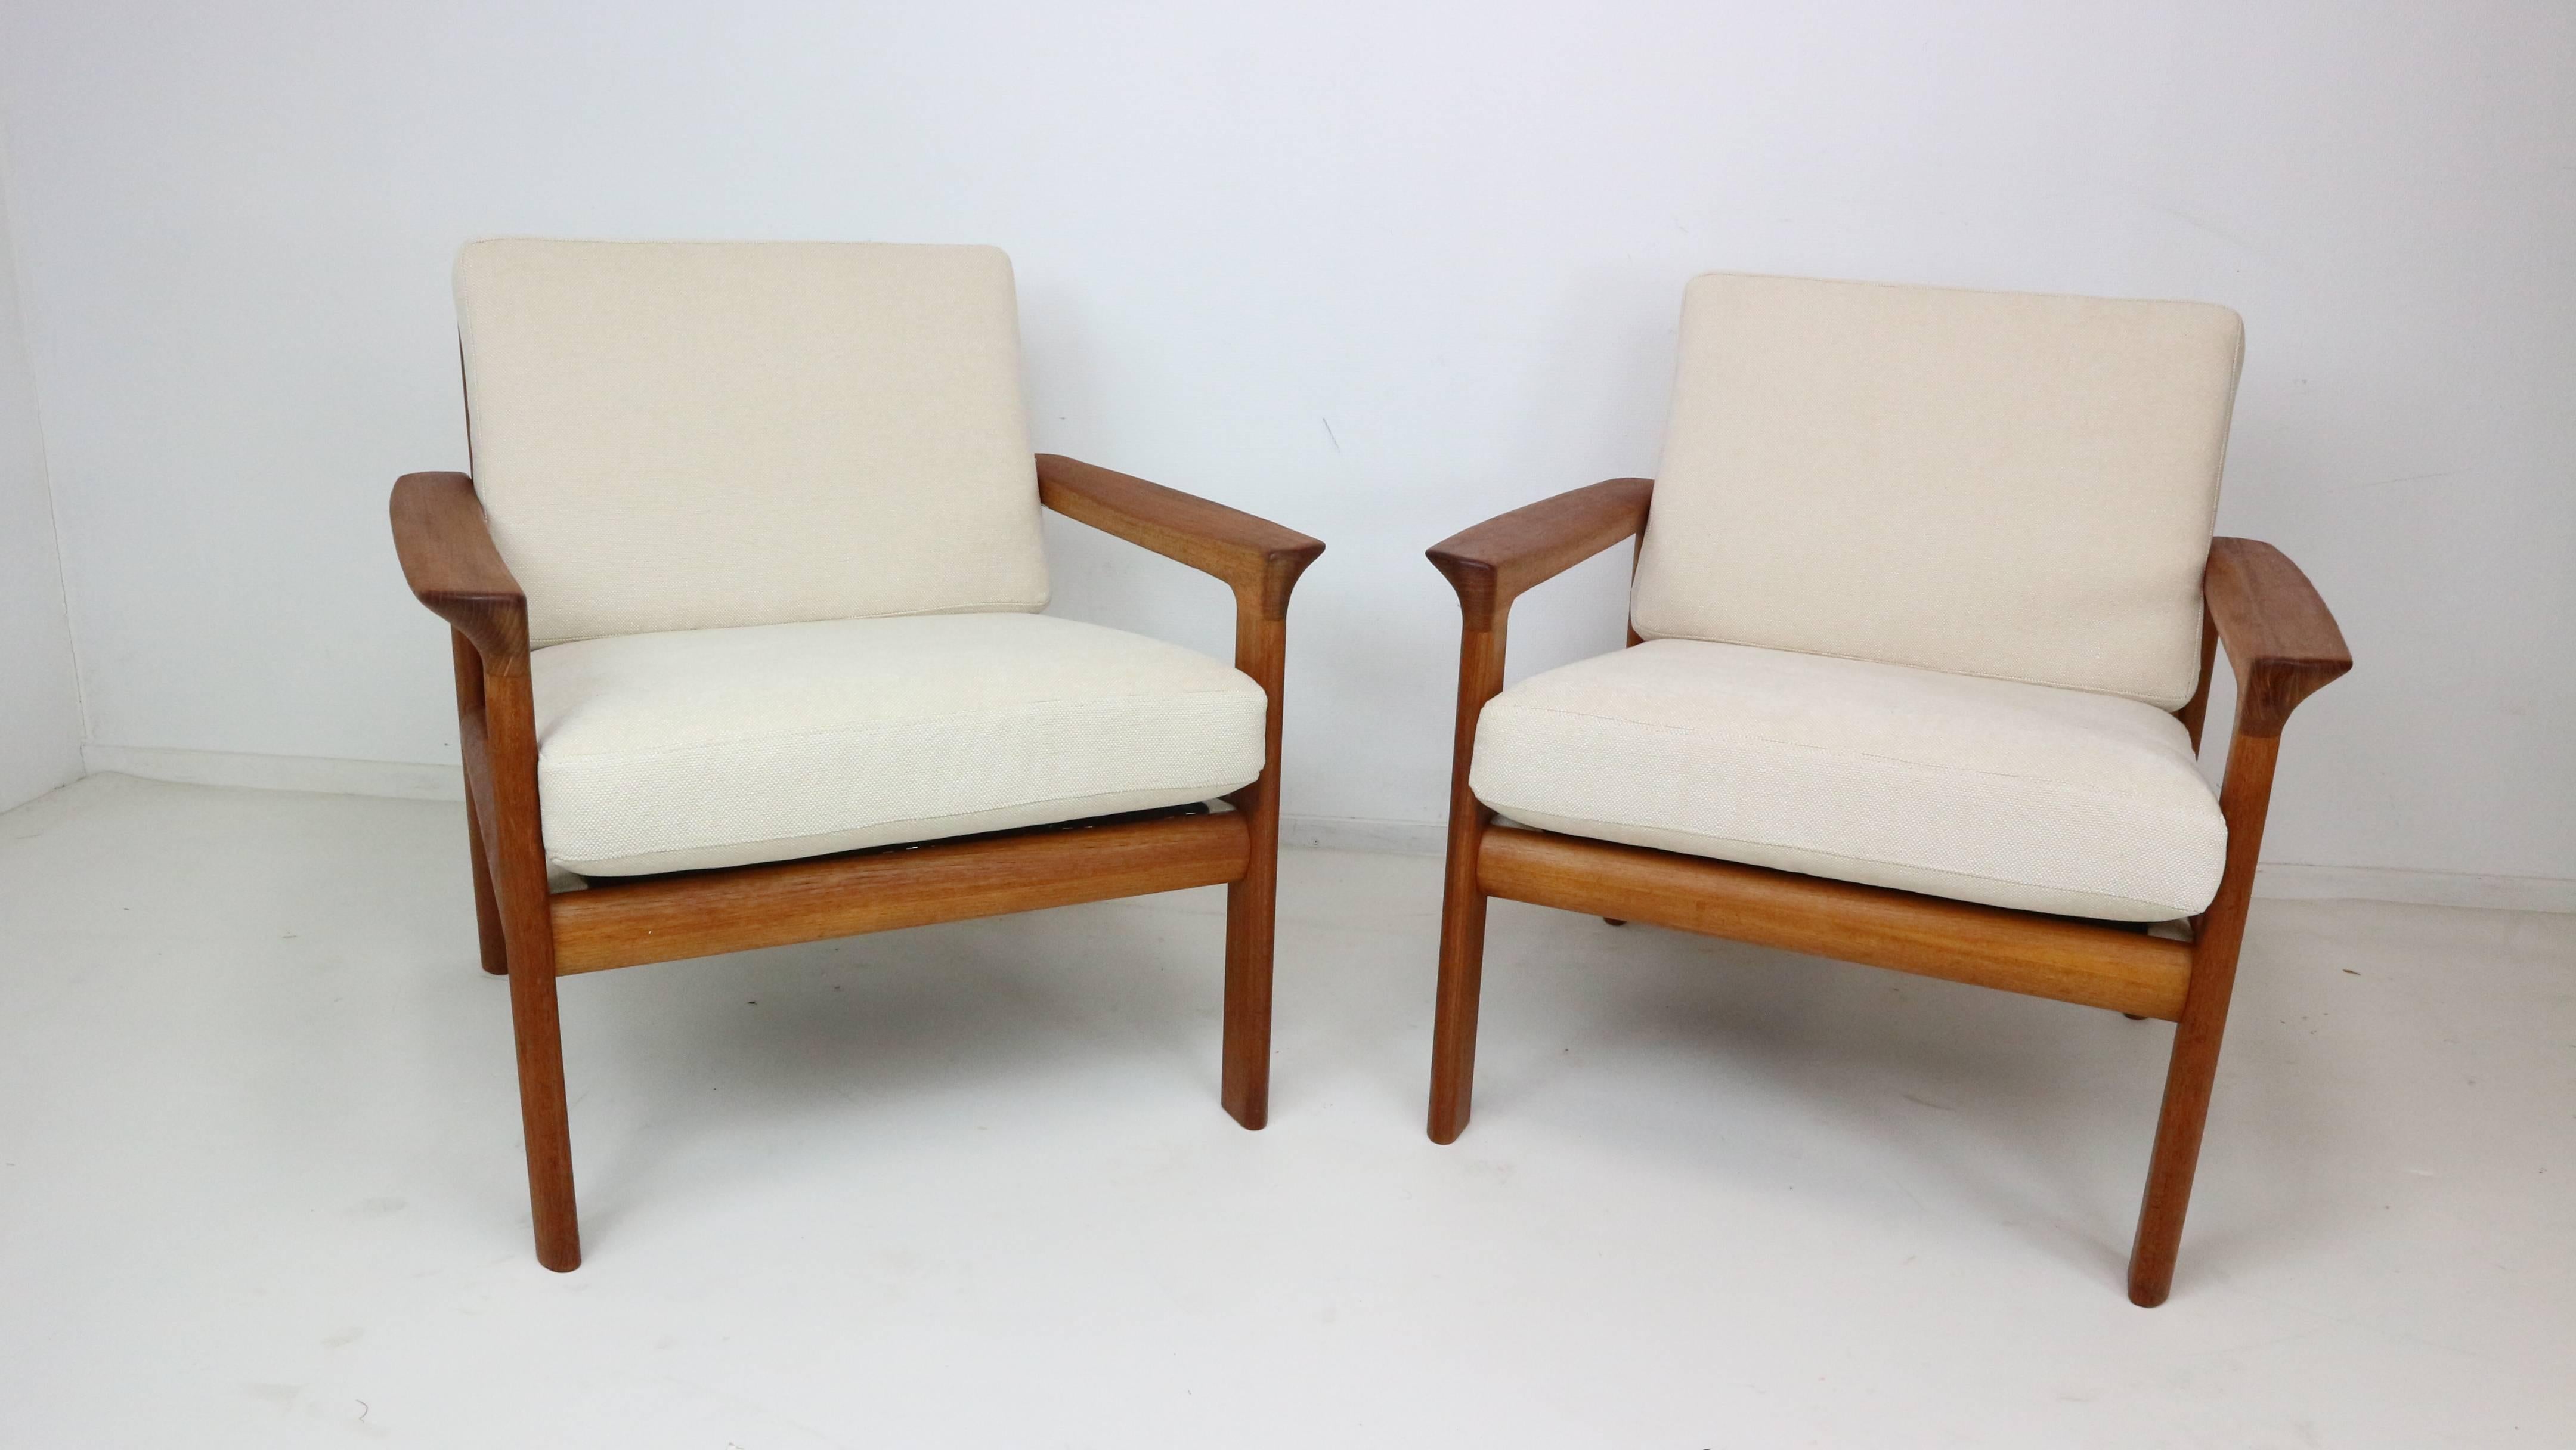 This 'Borneo' lounge chair was designed by Sven Ellekaer for Komfort, Denmark in the 1960s. It features a beautiful shaped solid teak frame with new of-white/light-beige upholstery and new webbing.
Marked by the maker.
 